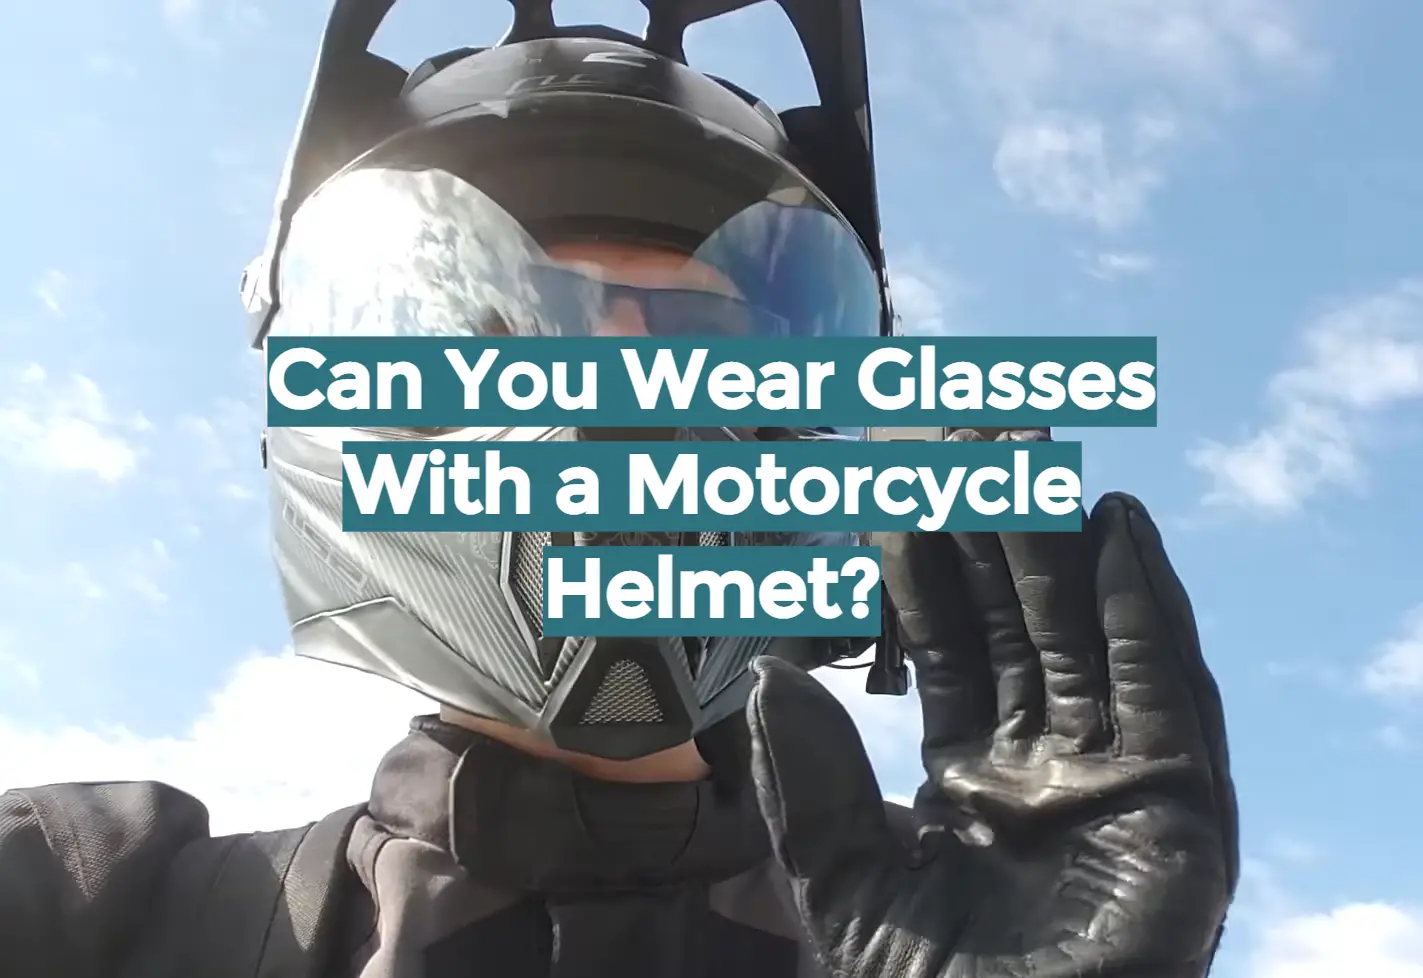 Can You Wear Glasses With a Motorcycle Helmet?